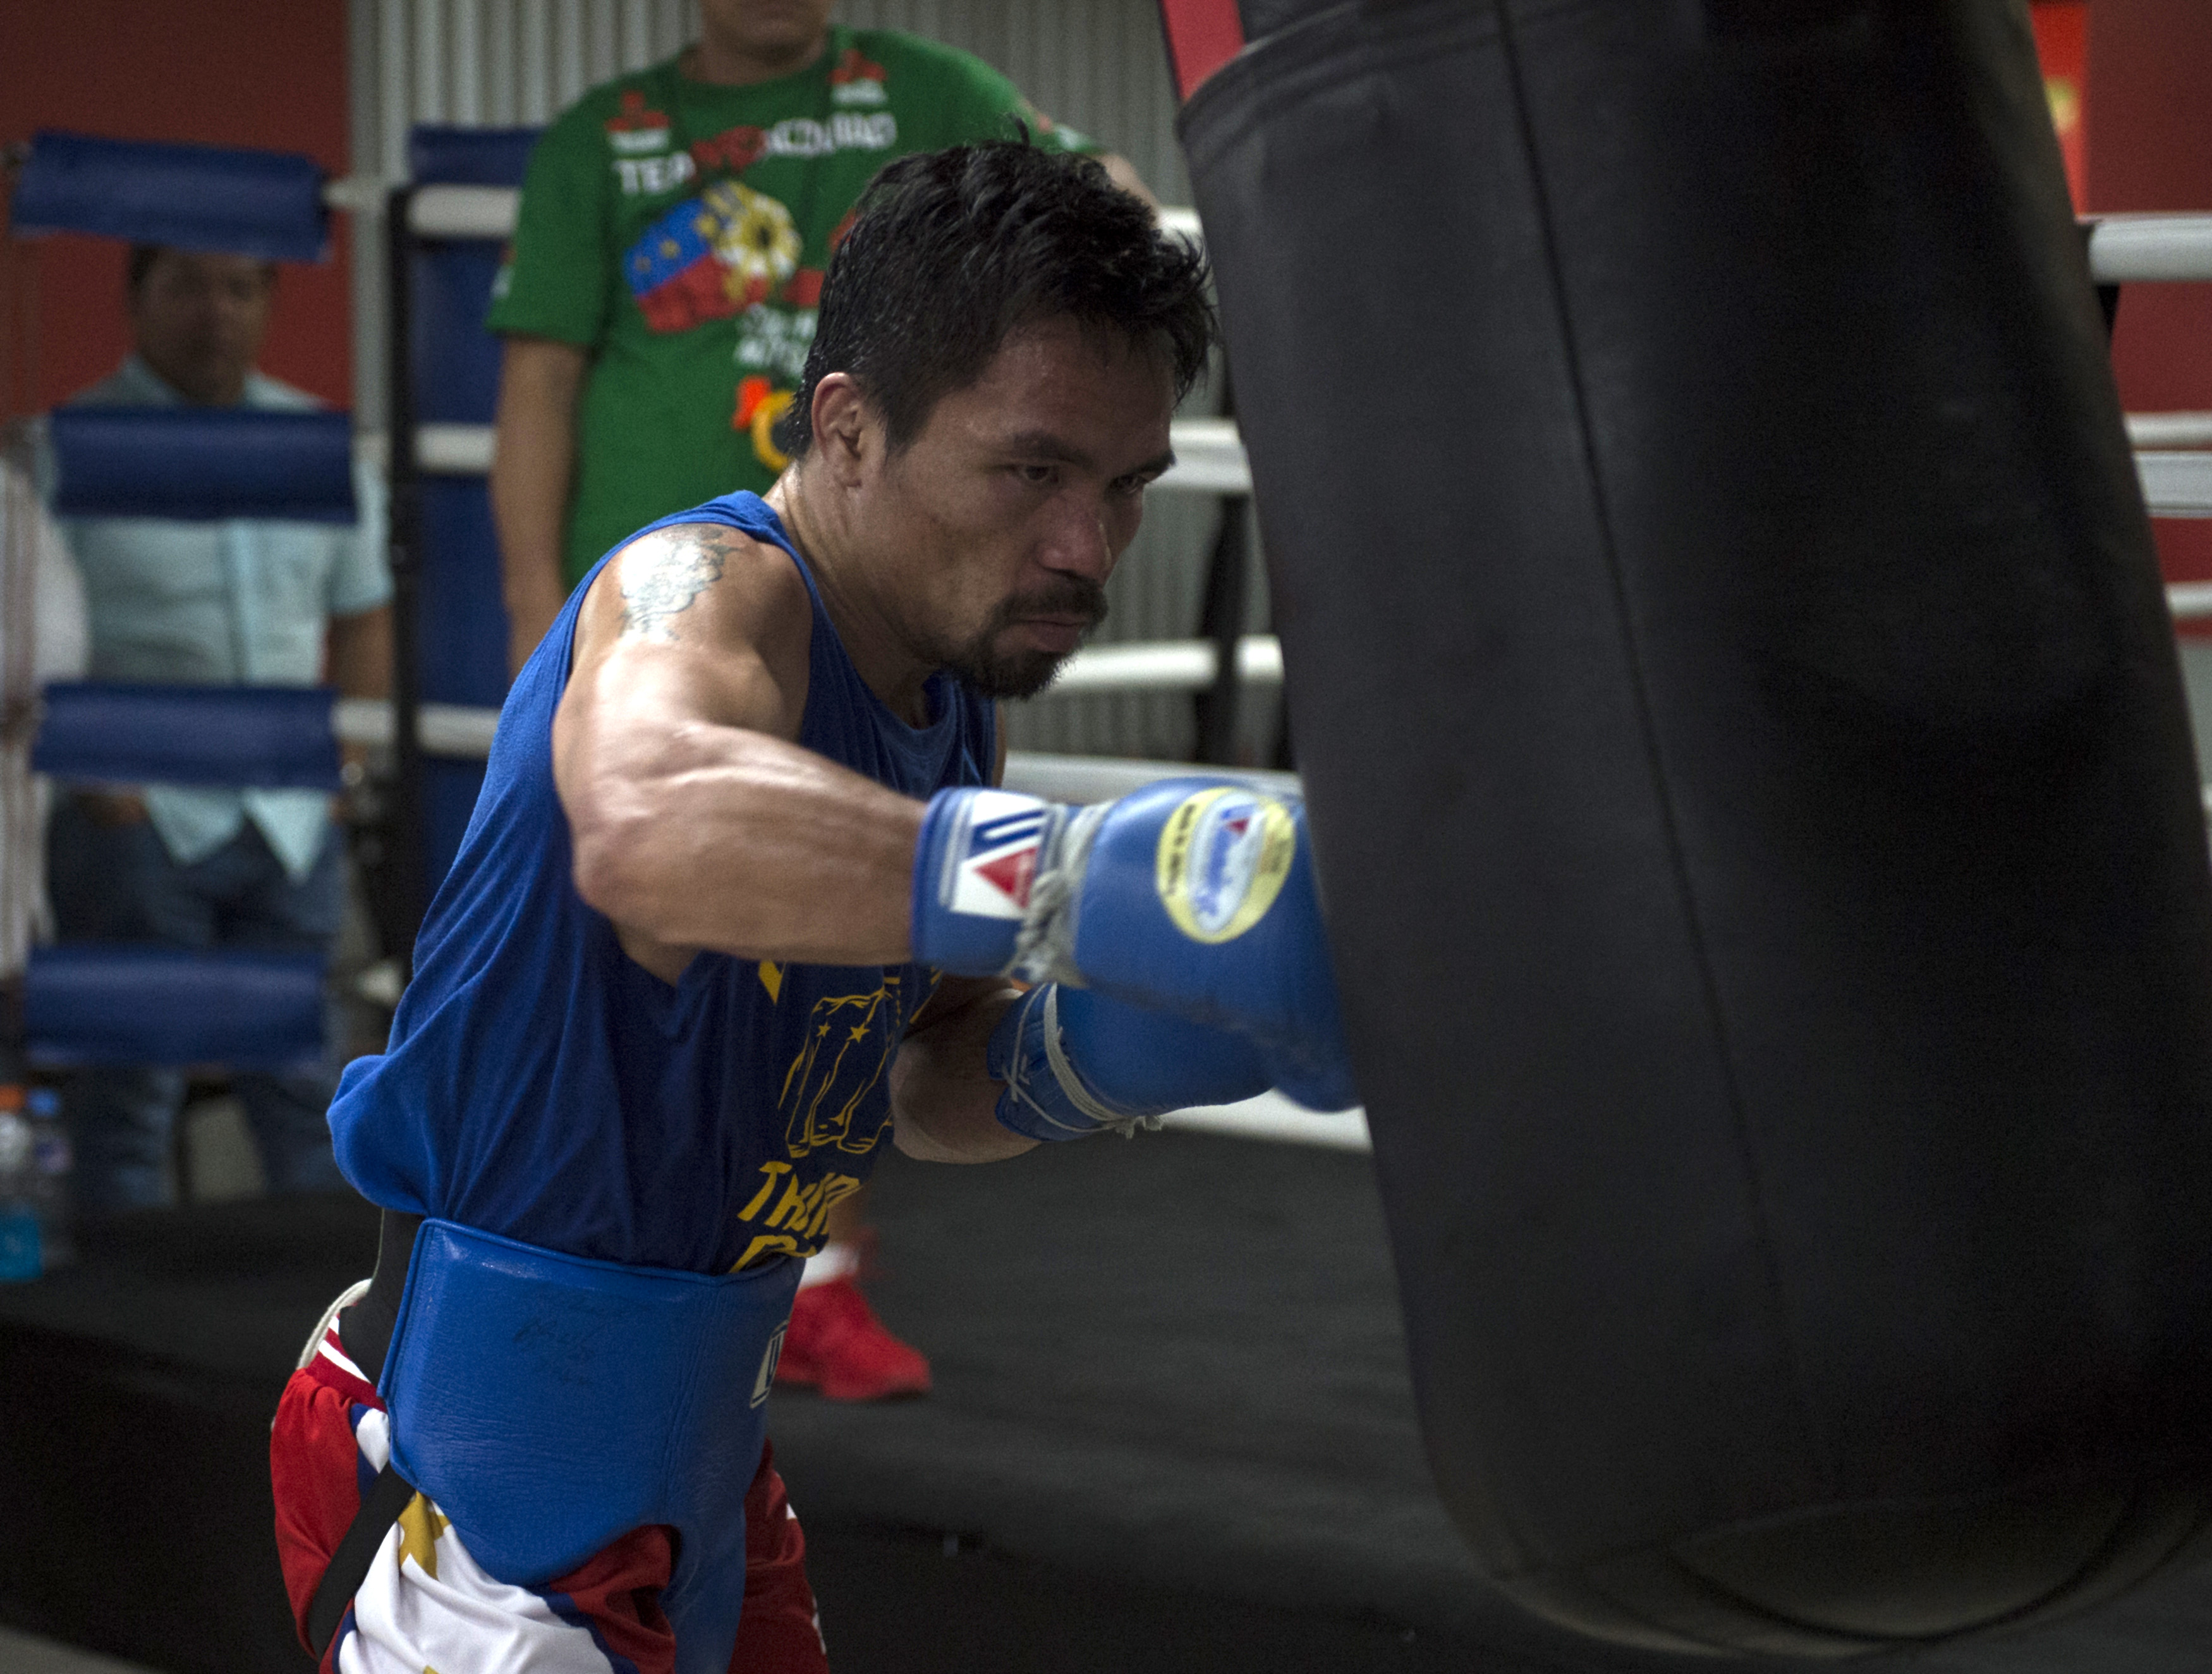 In this photo taken on September 29, 2016, Philippine boxing icon Manny Pacquiao trains at a gym in Manila, ahead of his November 6 bout with Mexican boxer Jessie Vargas.  Pacquiao insisted September 30 he owed his fans and countrymen no apology after admitting to having used illegal drugs. / AFP PHOTO / TED ALJIBE